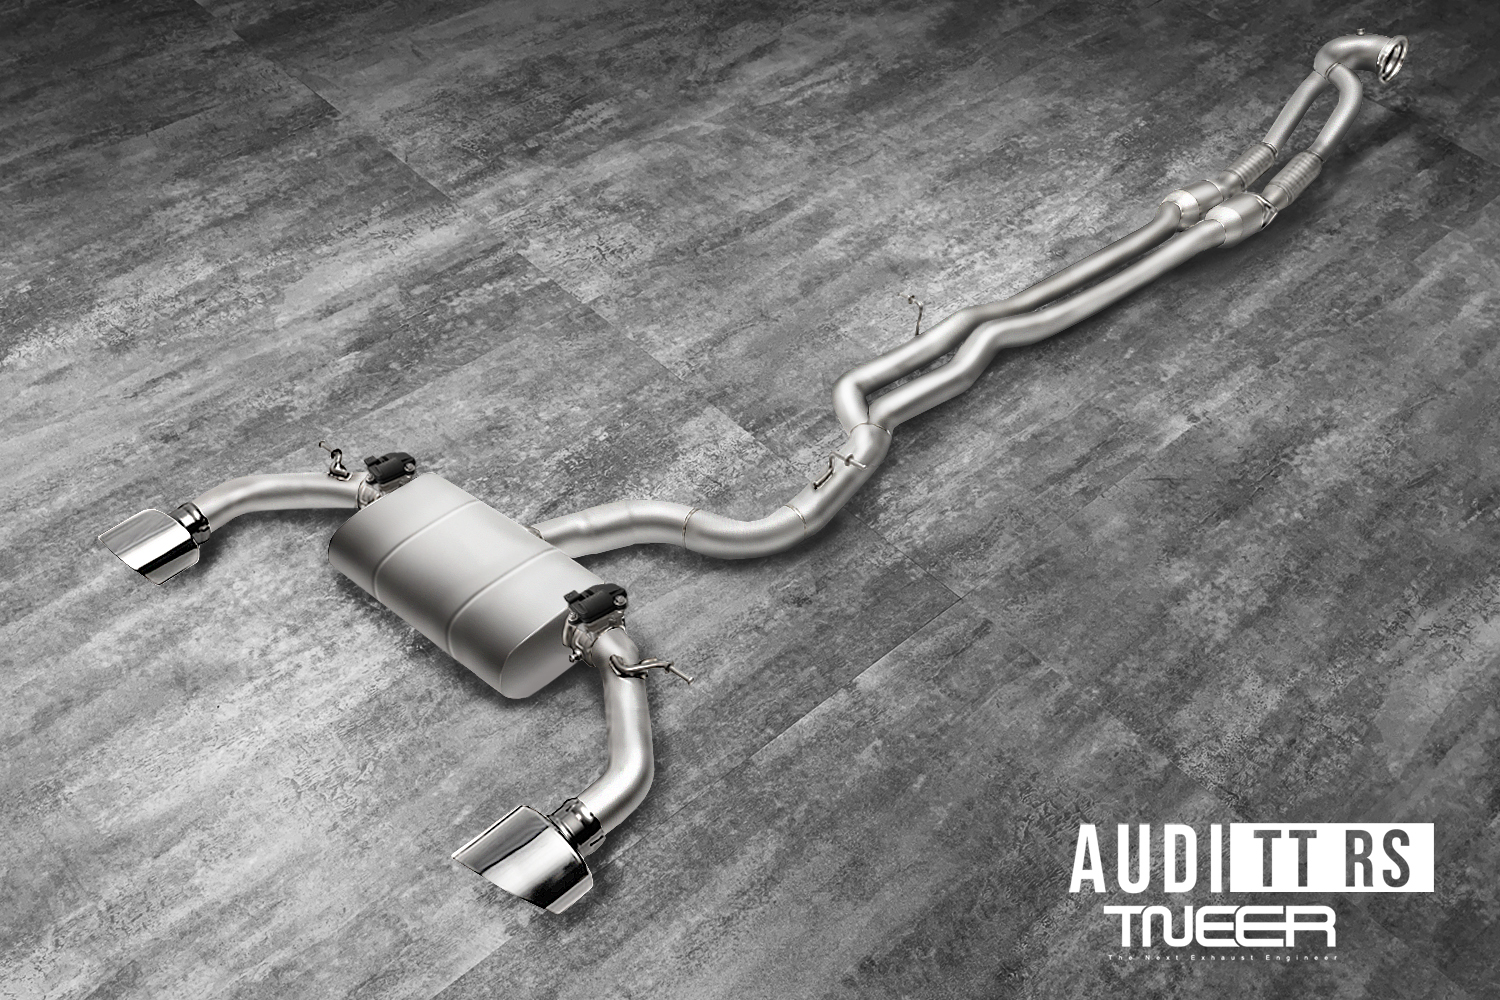 Audi TT-RS (8S) MK3 TNEER Exhaust System with TACS